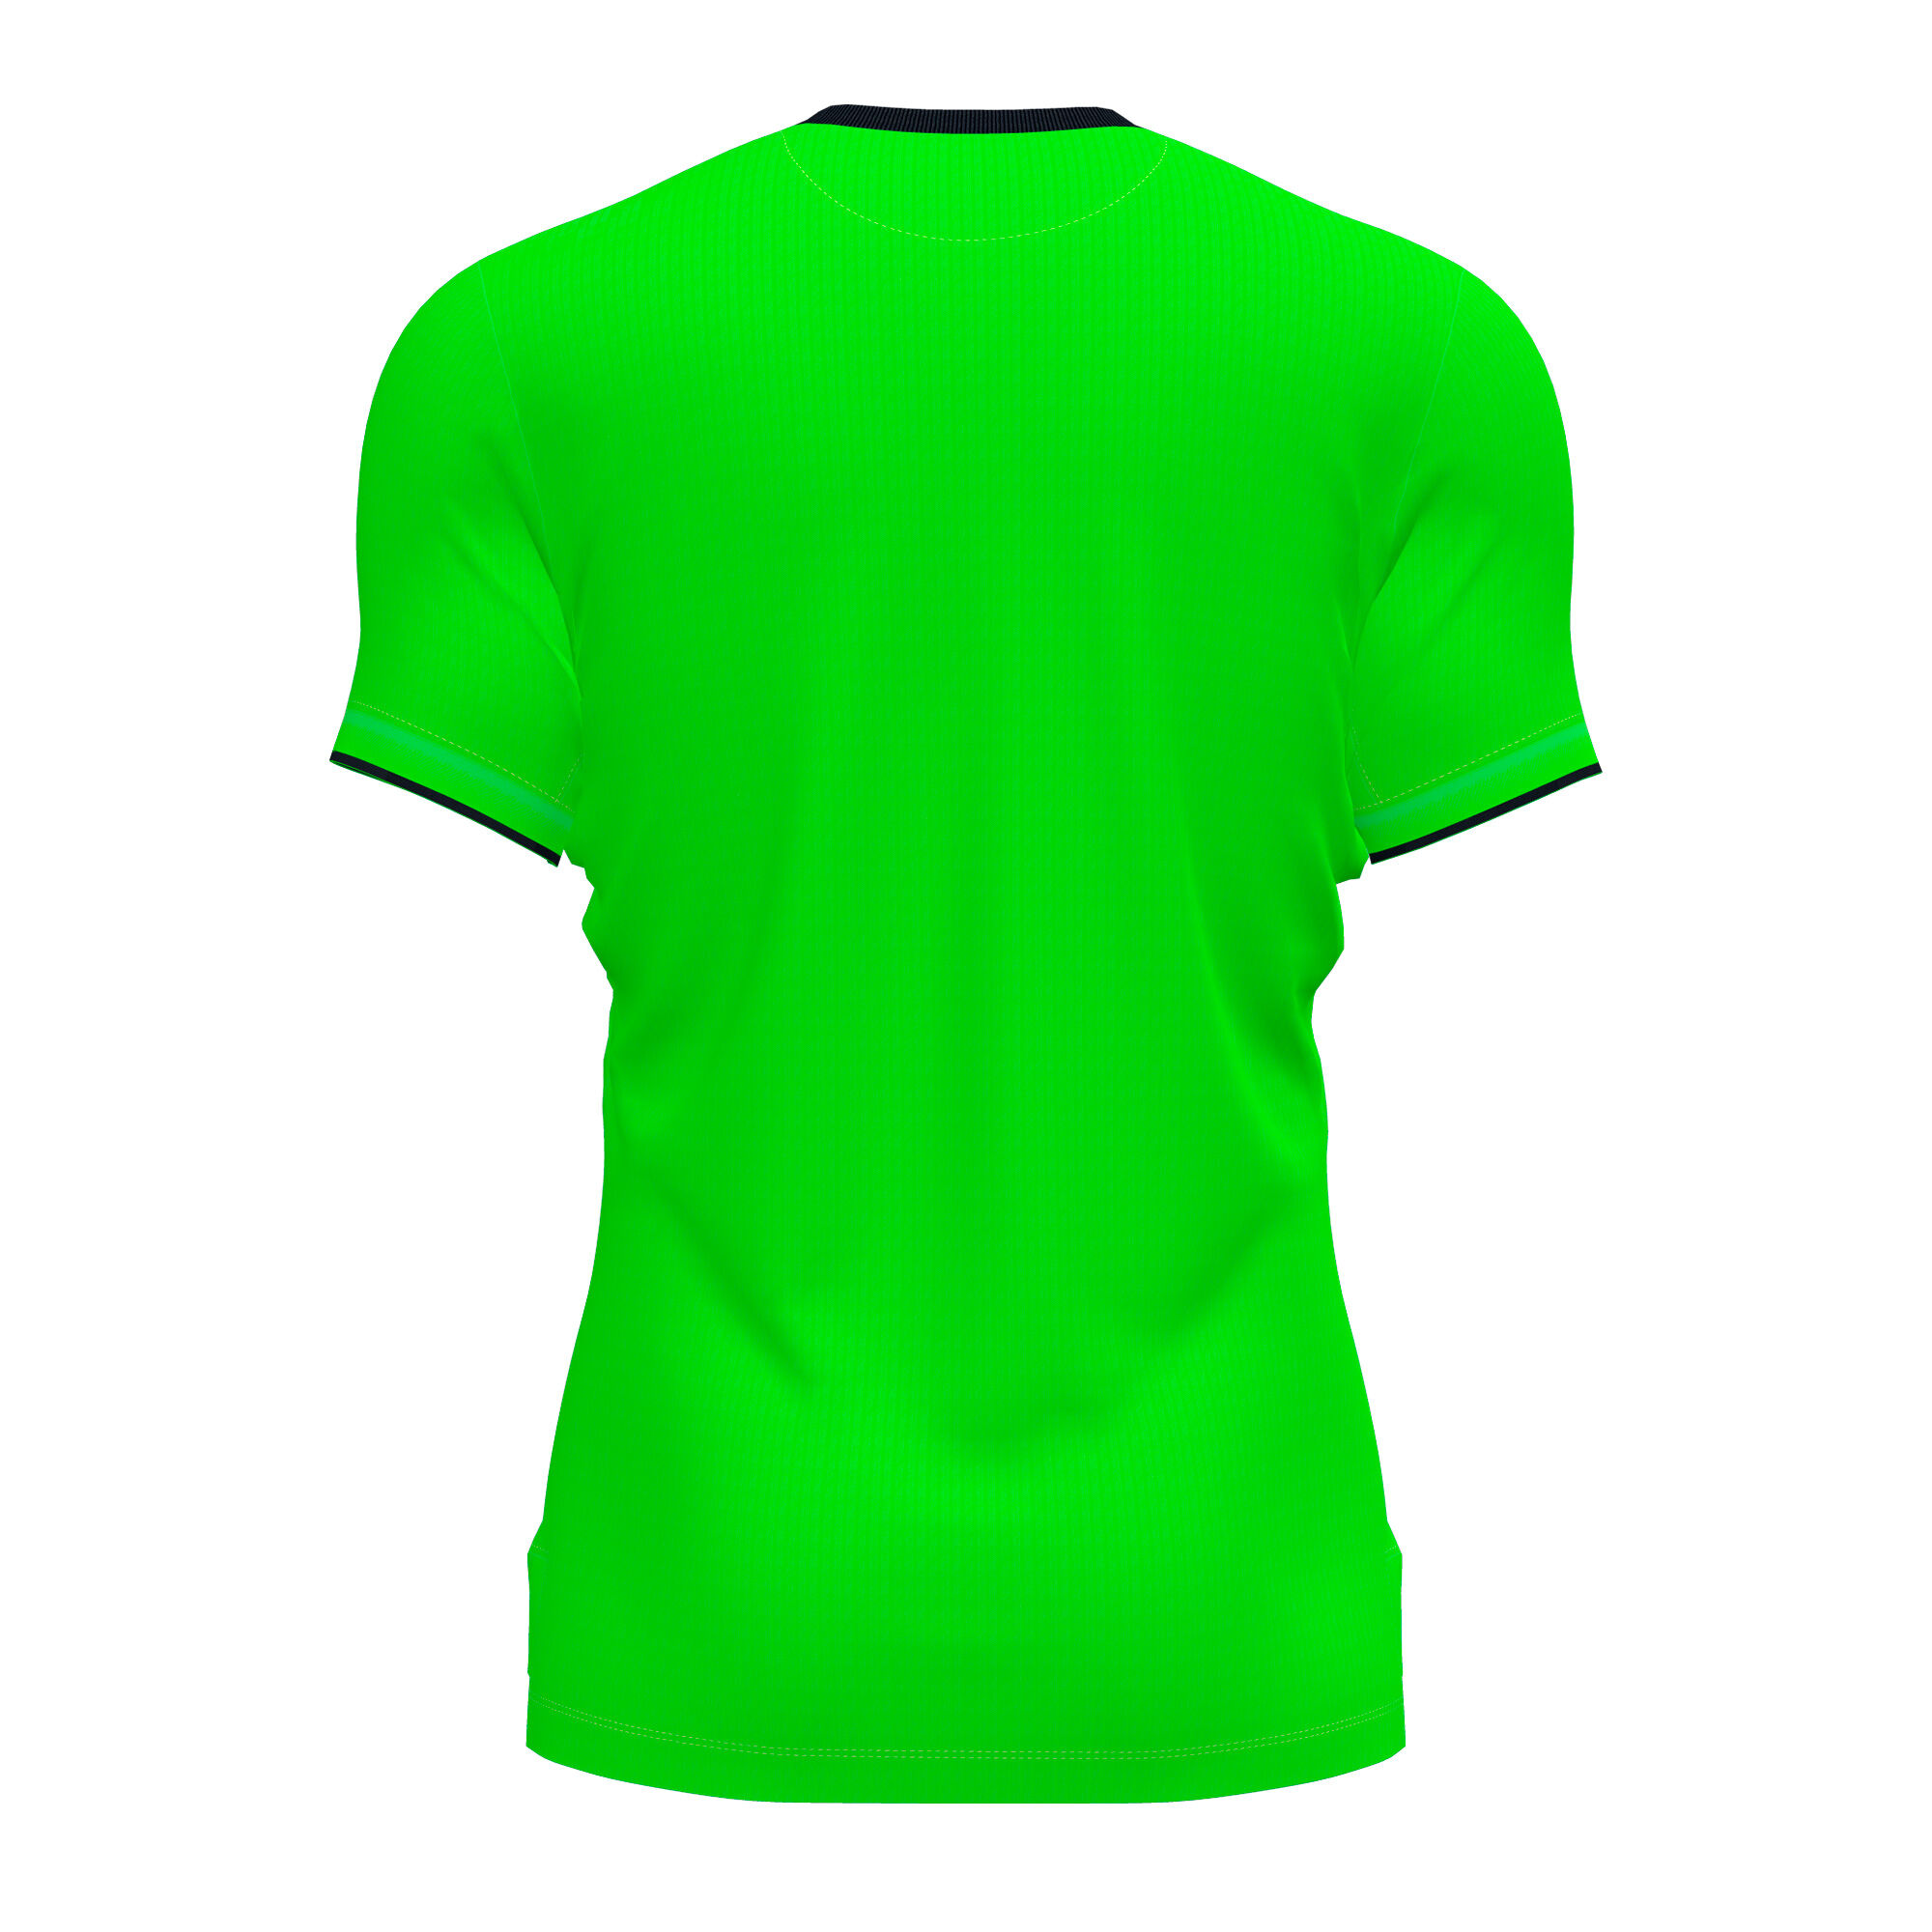 MAILLOT MANCHES COURTES HOMME GOLD III VERT FLUO